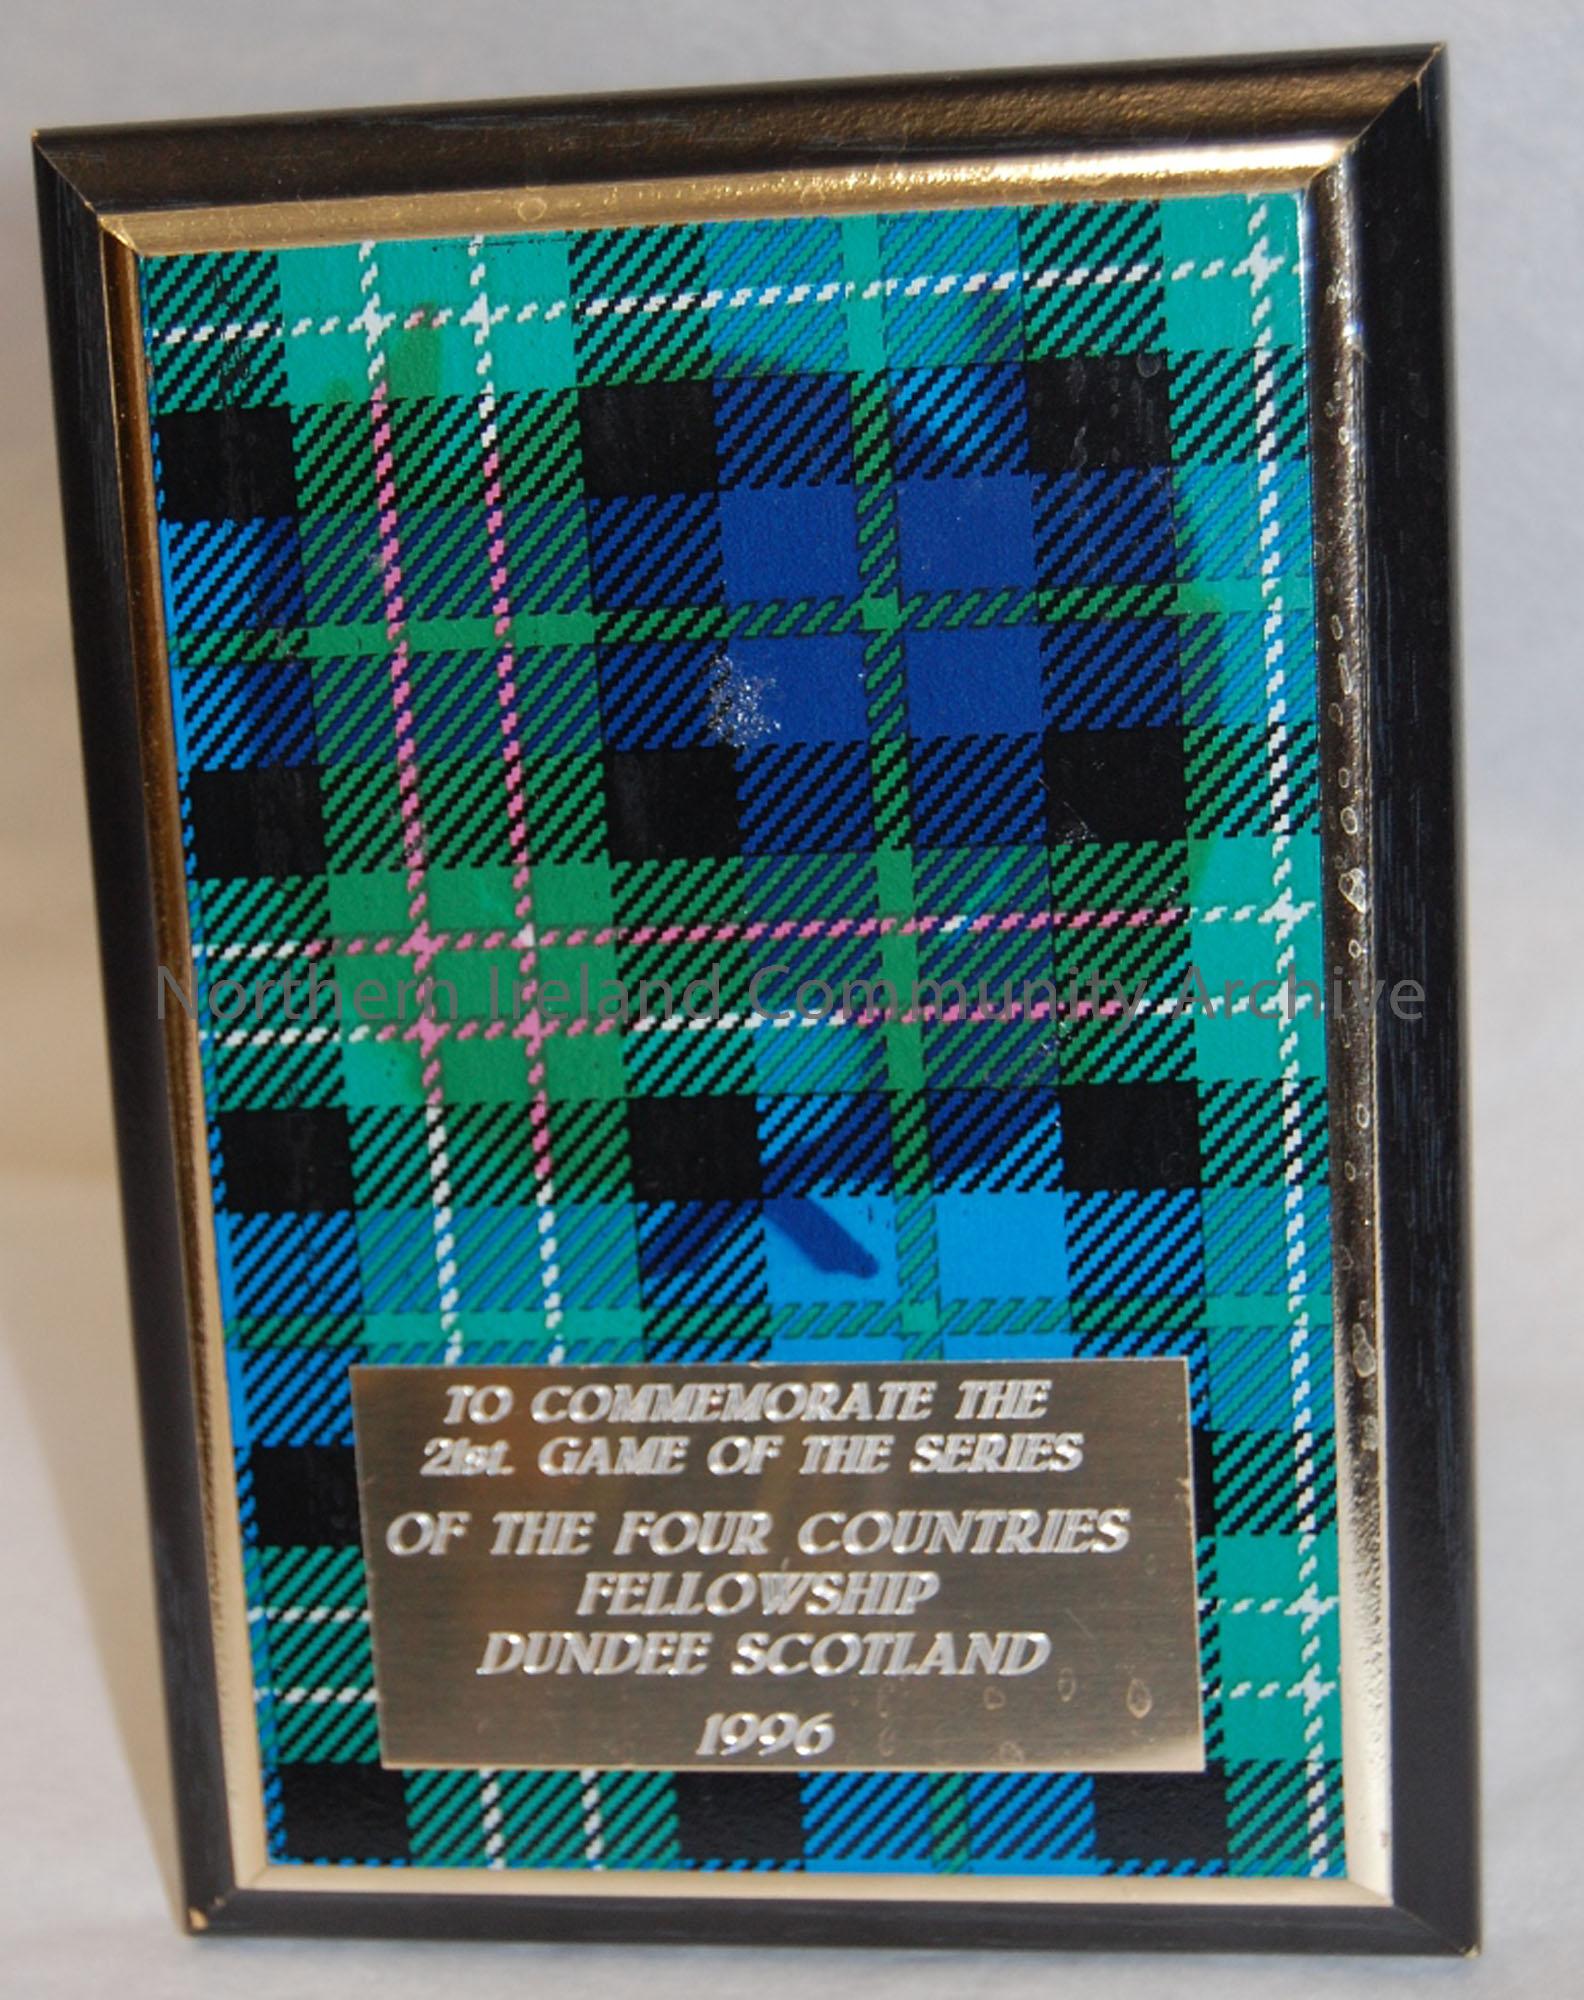 Rectangle shaped plaque with a green tartan pattern ‘To commemorate the 21st Game of the Series of the Four Countries Fellowship Dundee Scotland 1996.